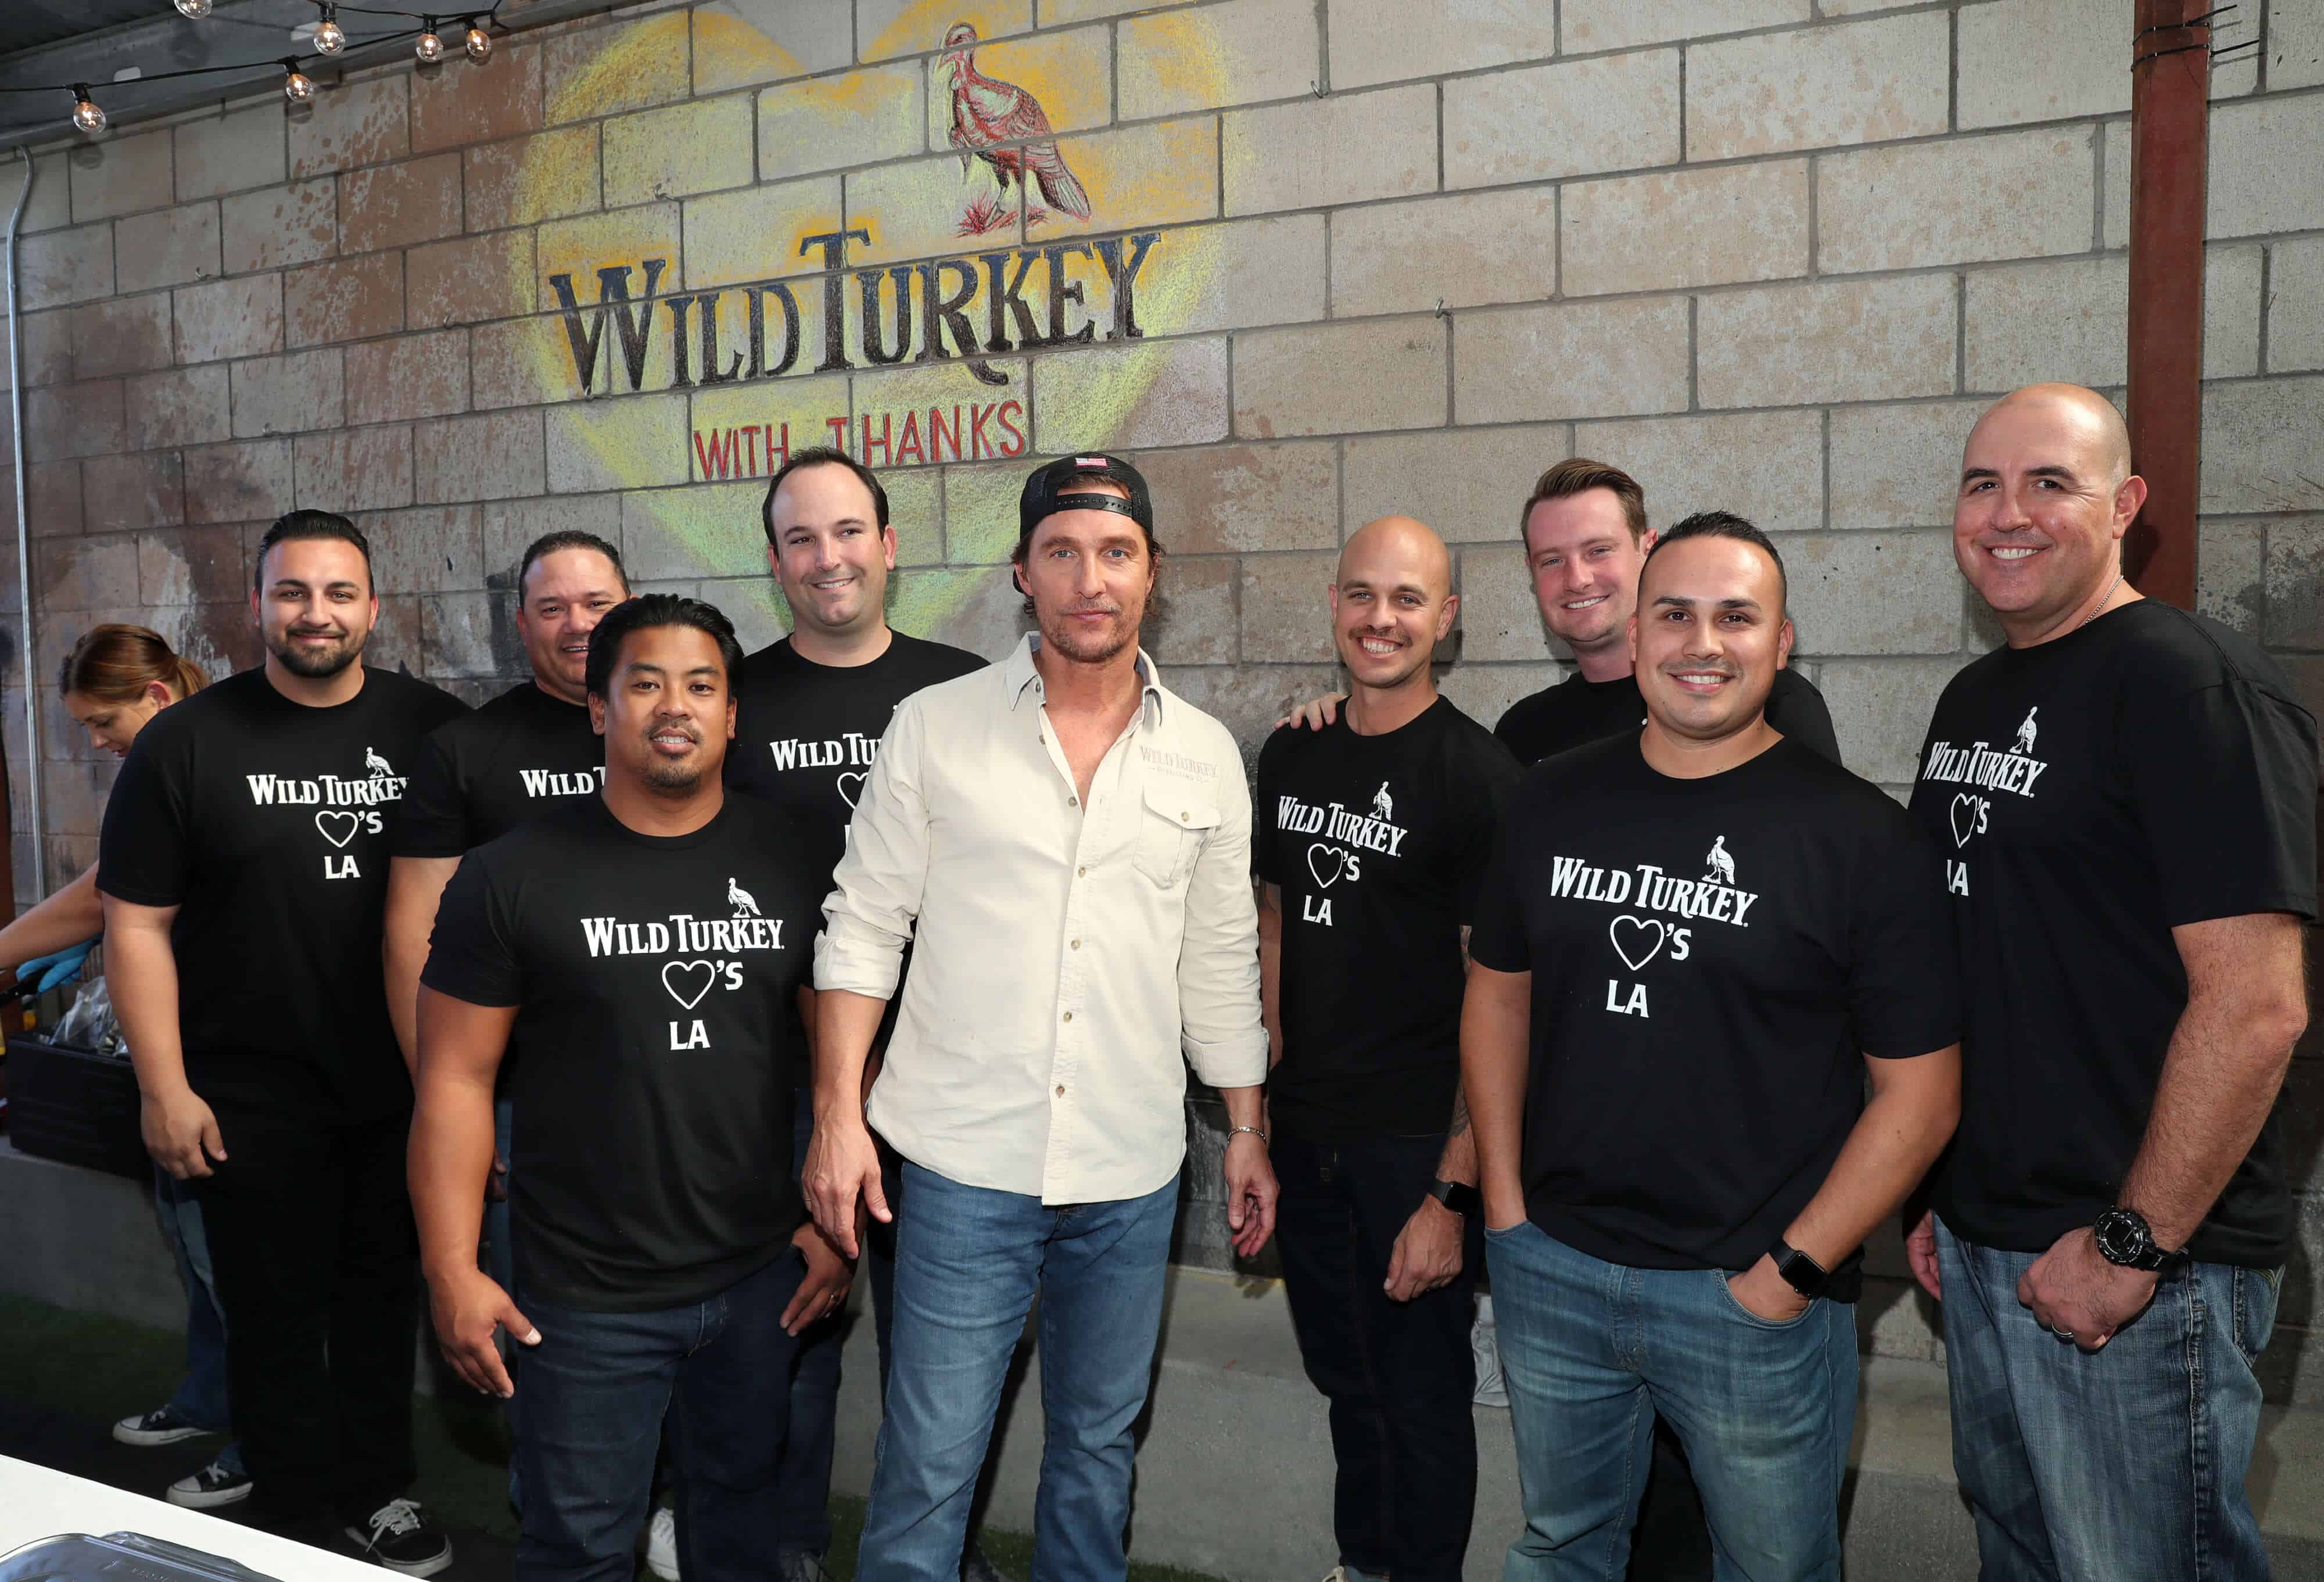 RJP11730 20191101120525841 20191101040149 - MATTHEW MCCONAUGHEY AND WILD TURKEY® BOURBON TEAM UP WITH OPERATION BBQ RELIEF TO PREPARE MEALS FOR LOS ANGELES FIRST RESPONDERS